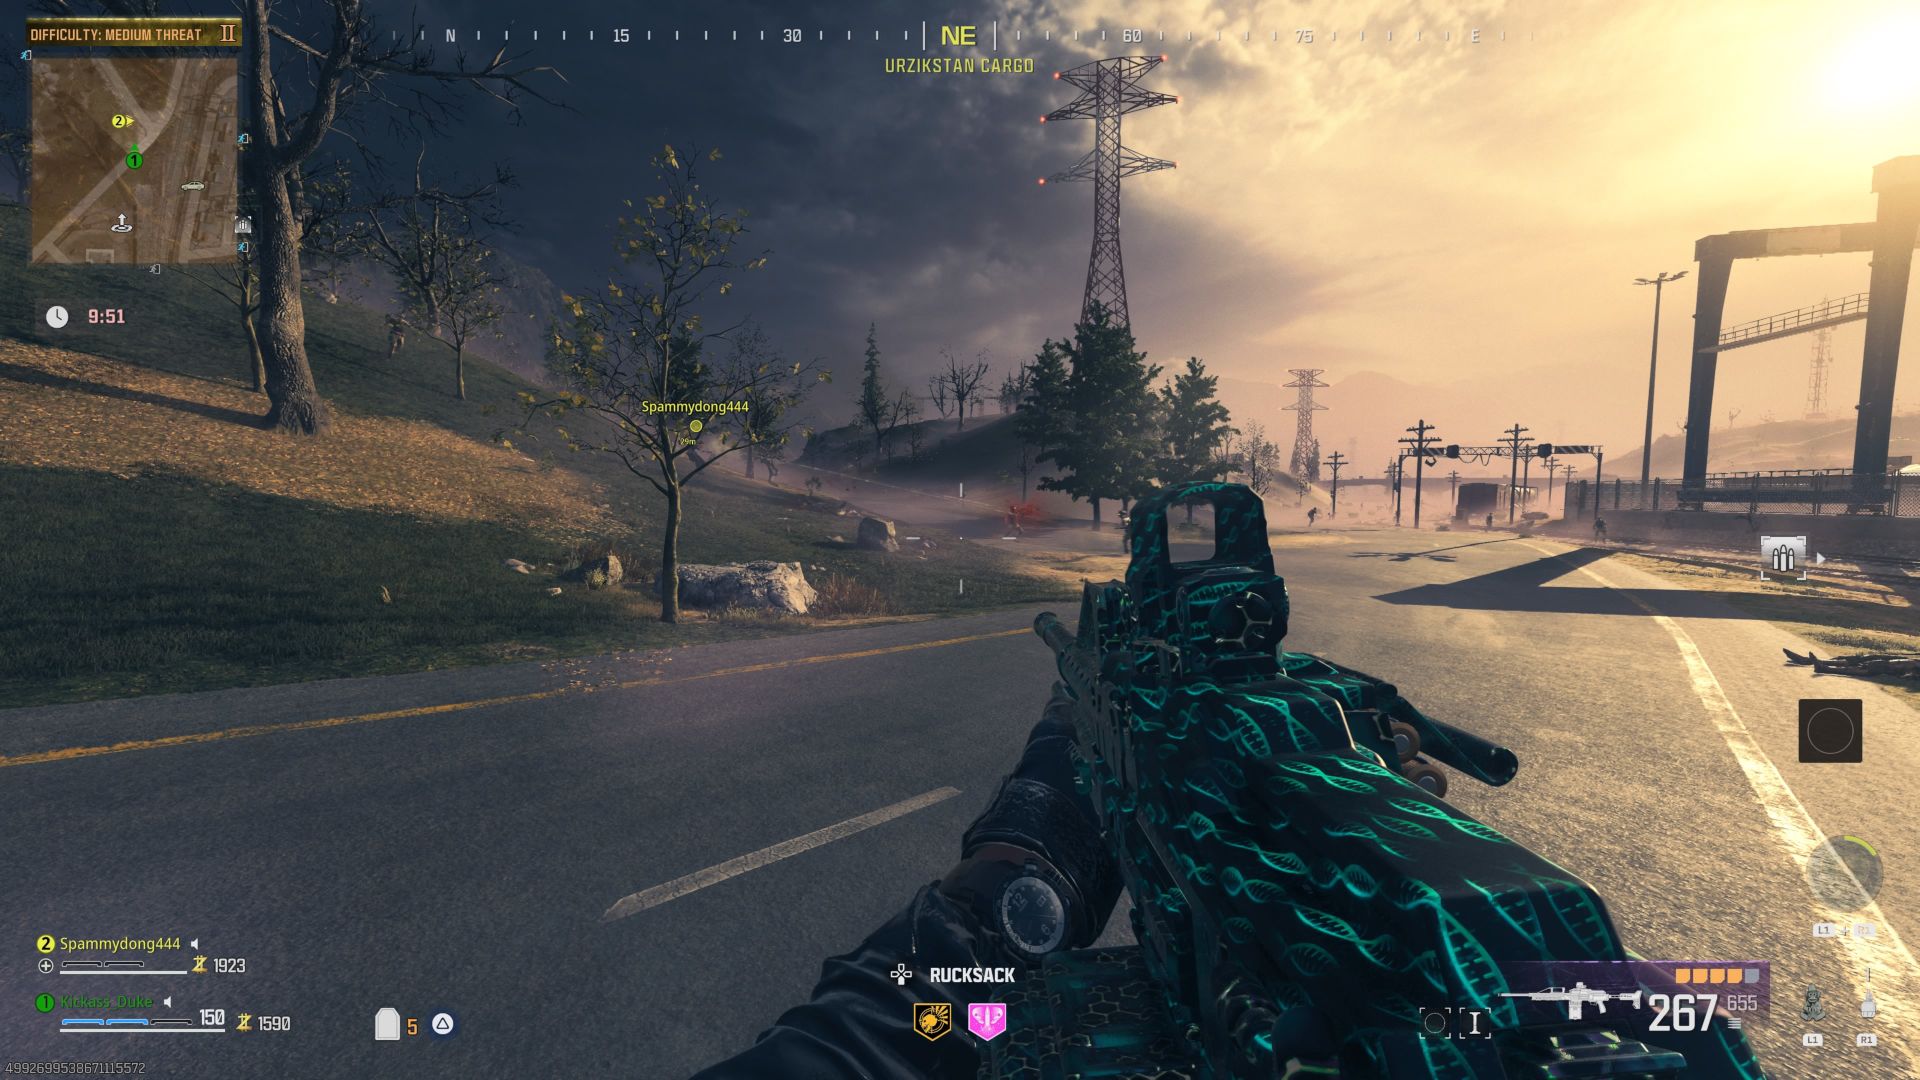 Screenshot from MW3 Zombie mode shows a large field populated by a scarce amount of trees and communication towers with around a half dozen zombies shambling around while the player holds a large machine gun.